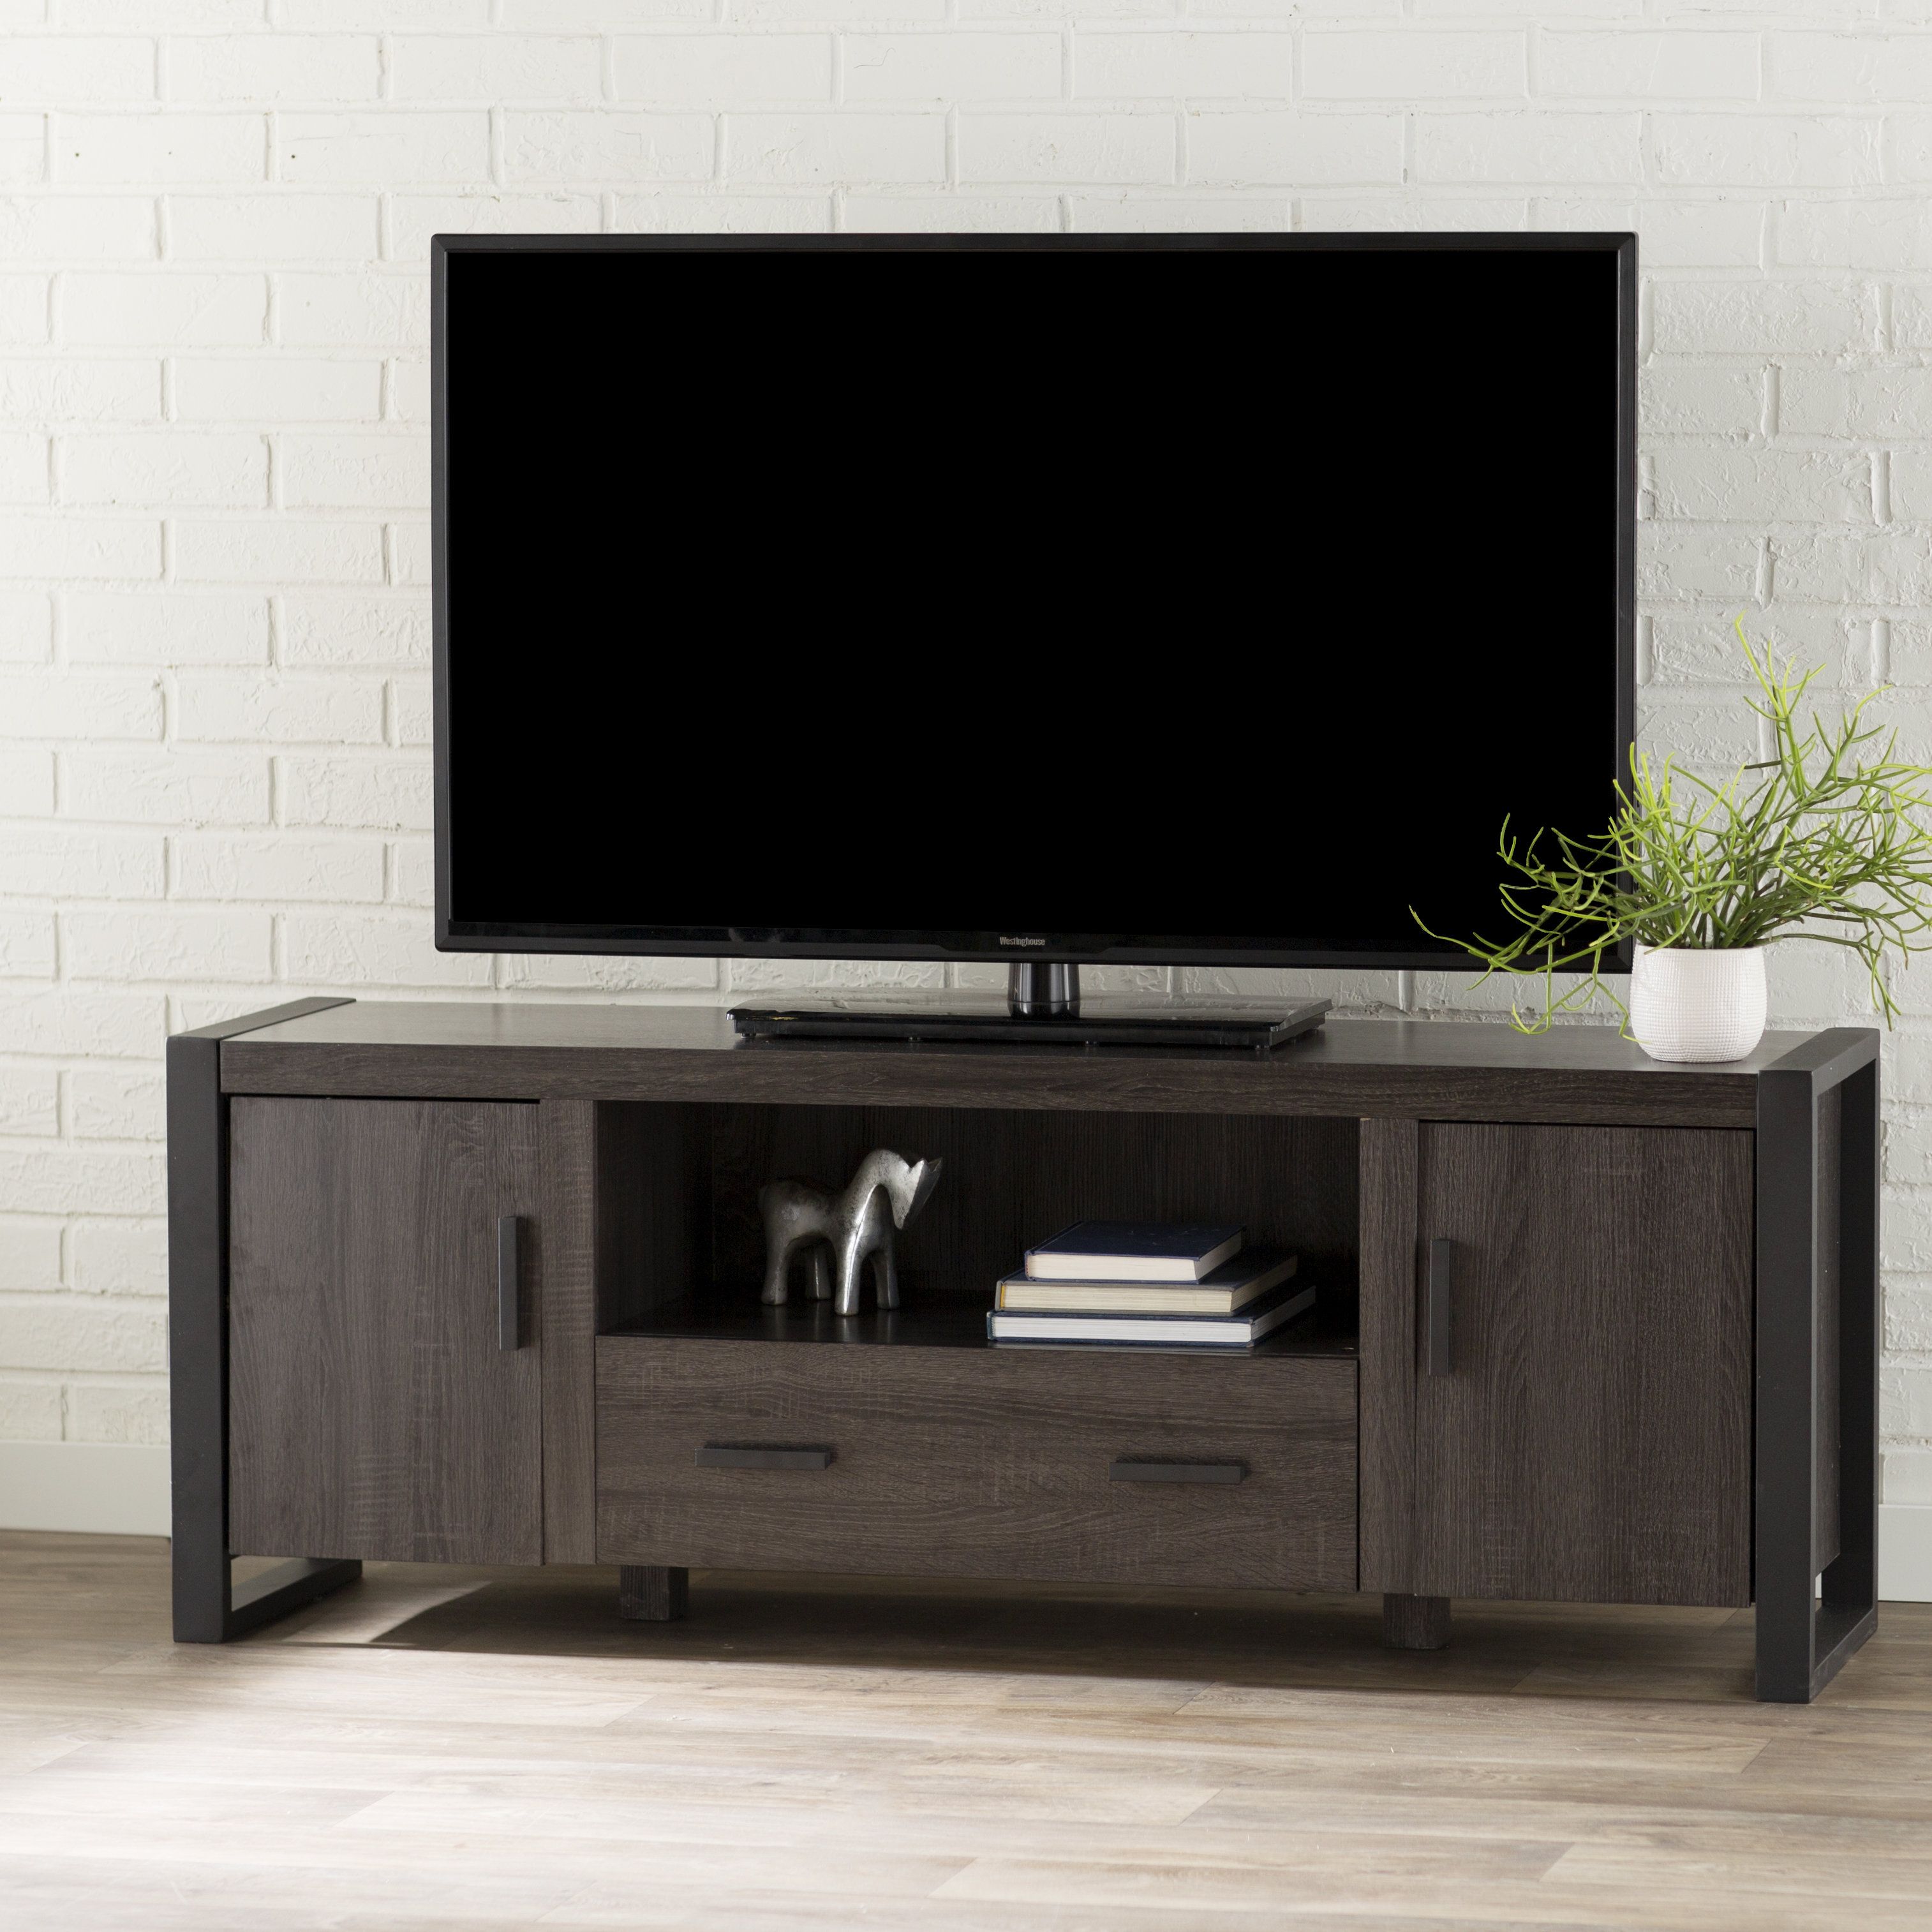 Modern Grey Tv Stands | Allmodern In Sinclair White 68 Inch Tv Stands (View 12 of 30)